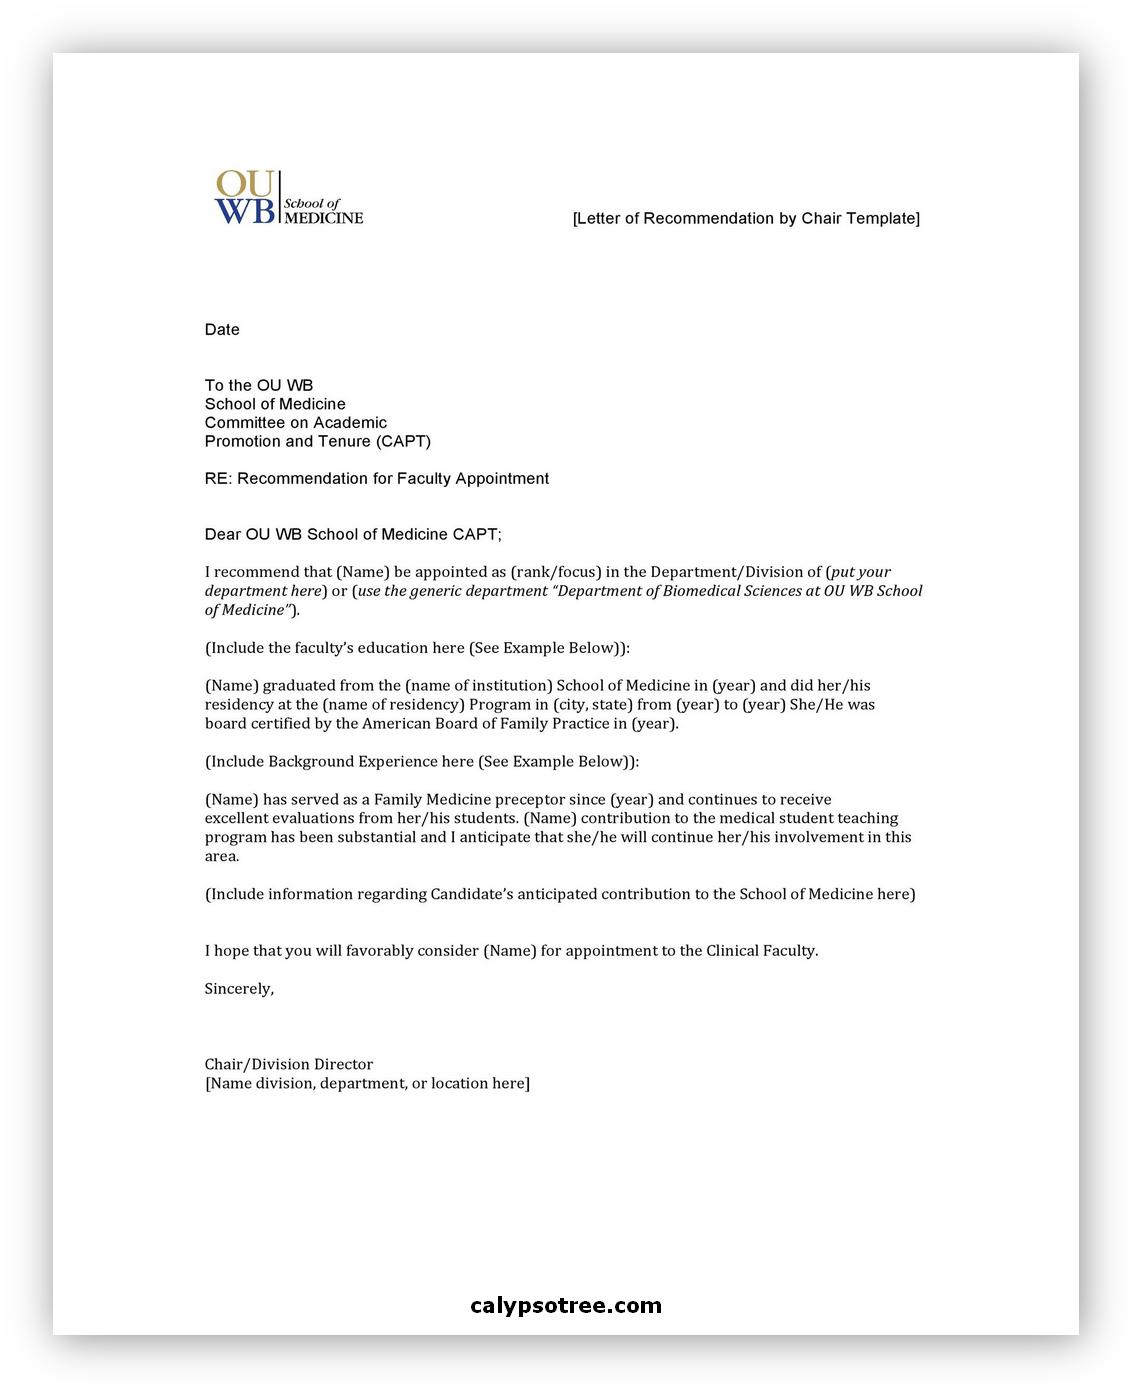 Letter of Recommendation Template 06